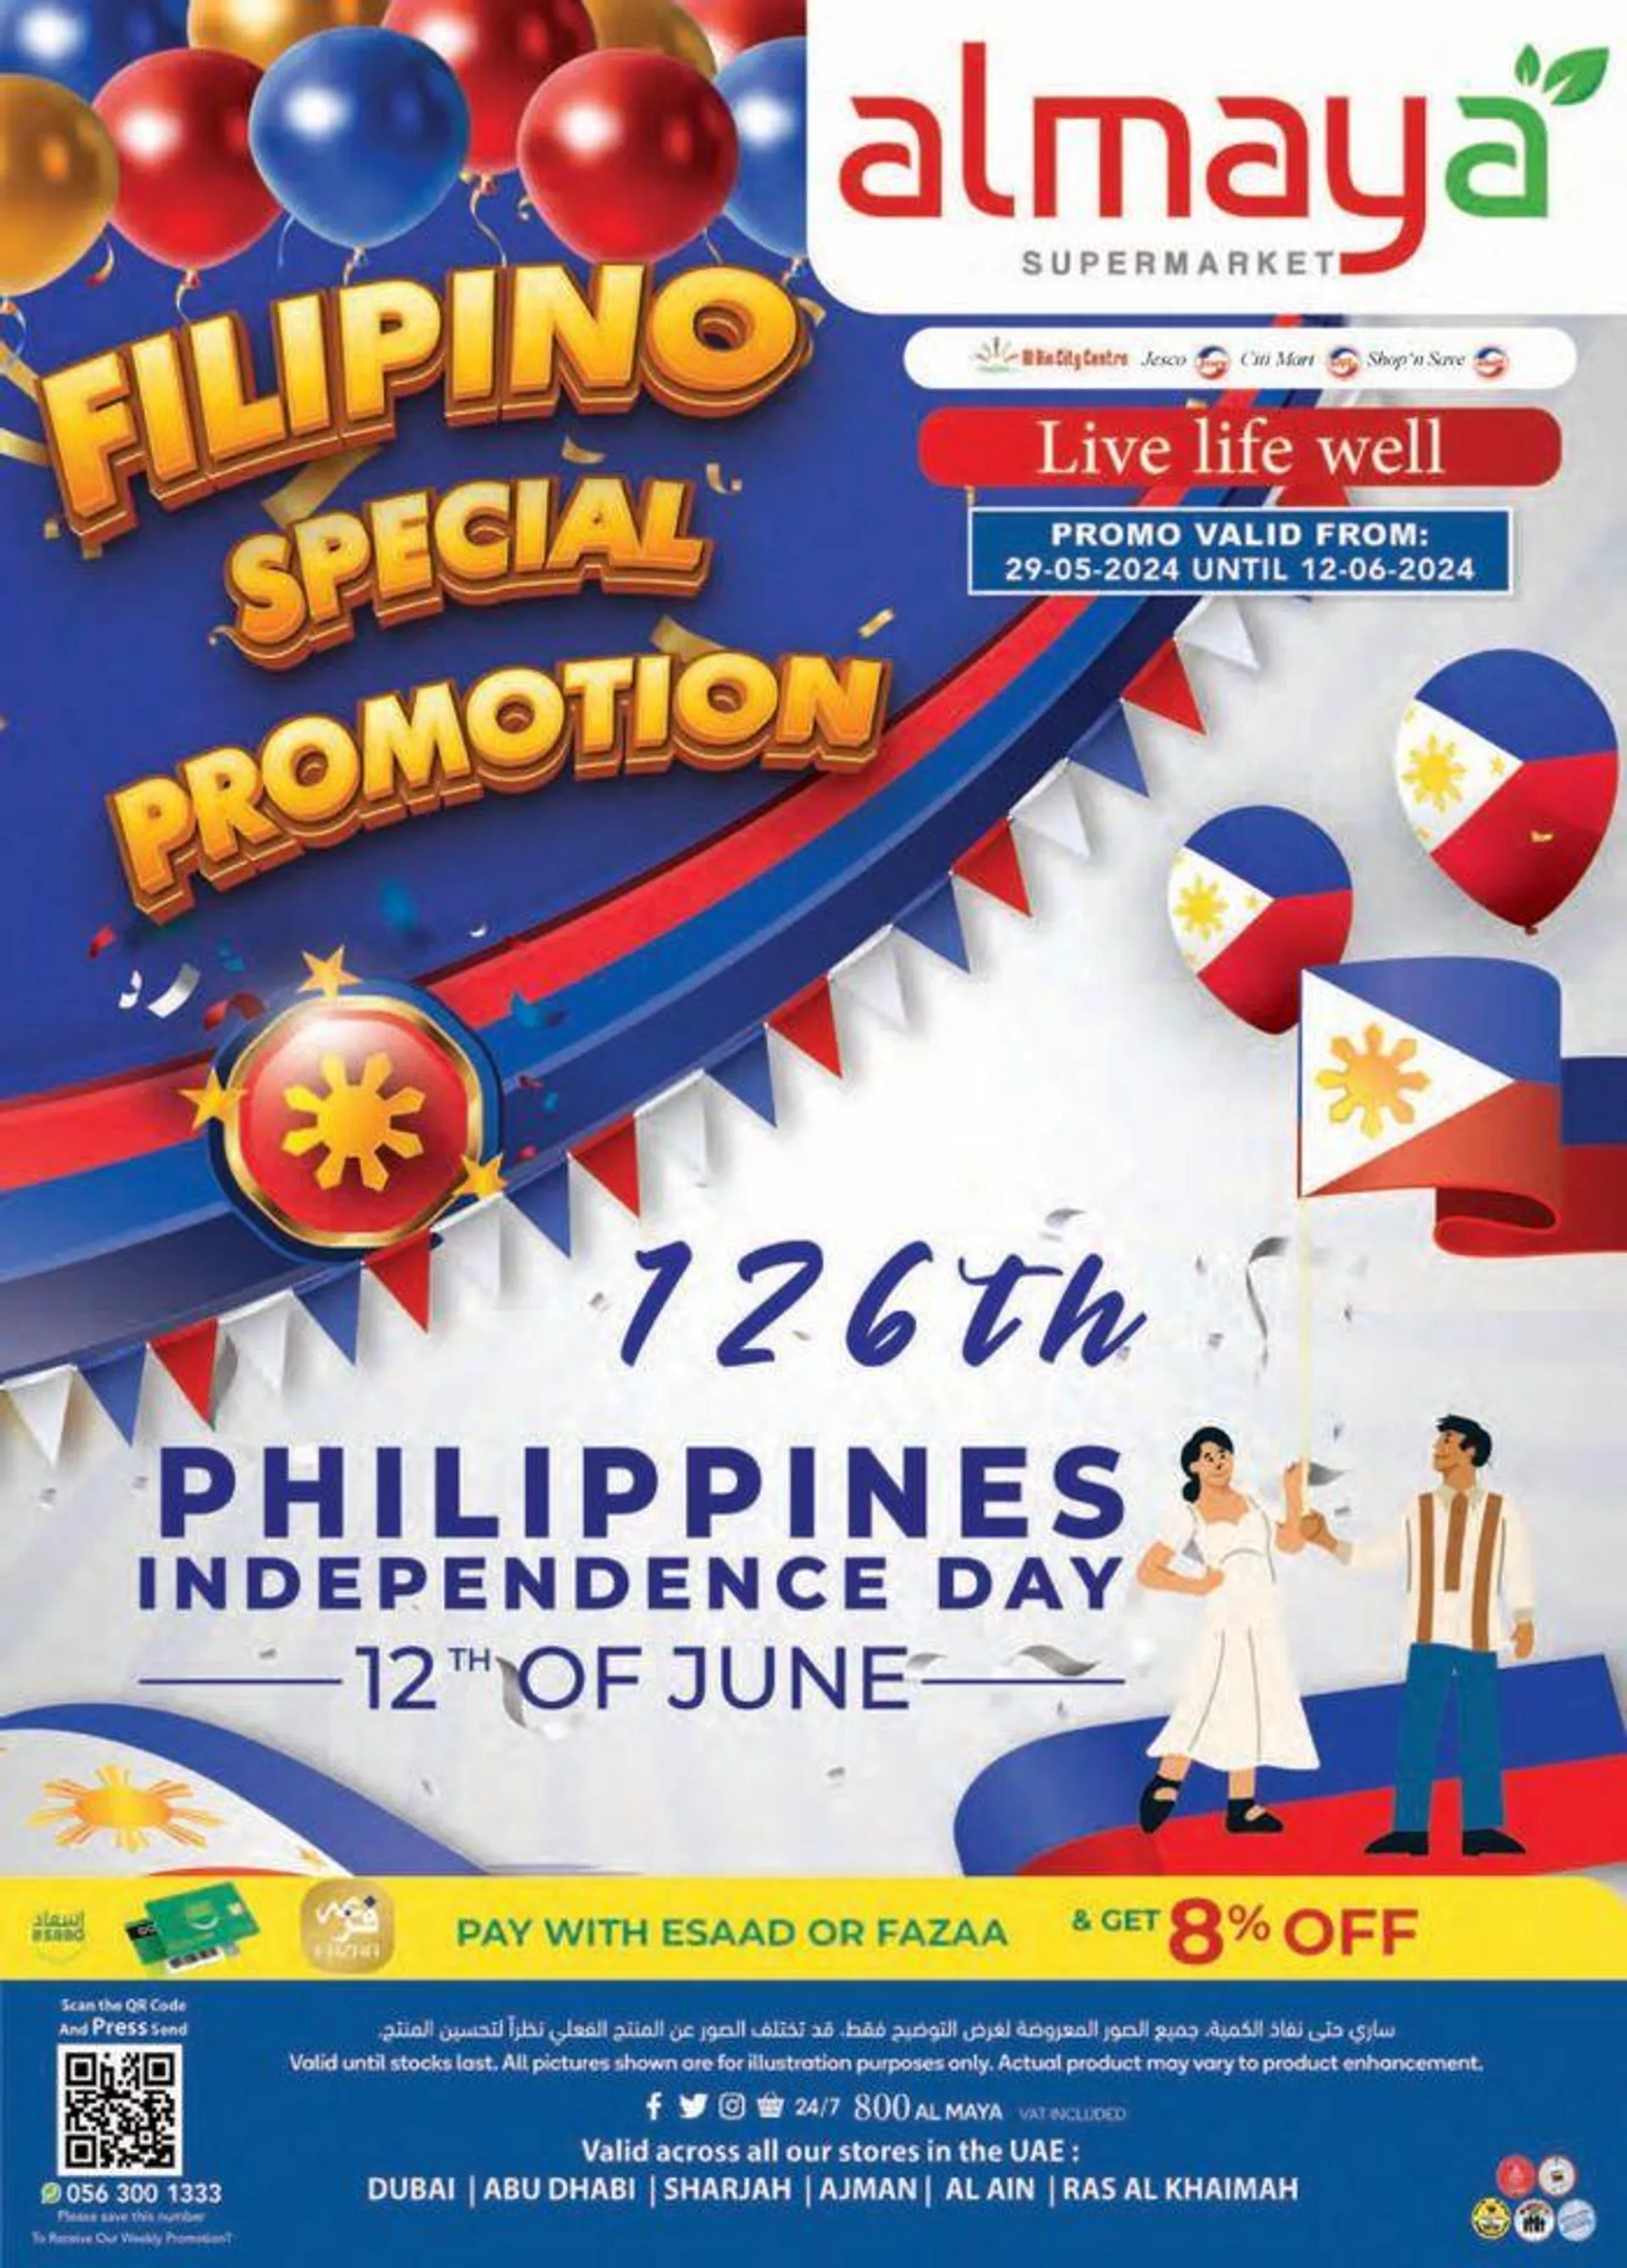 FIlipino Special Promotion! - 1